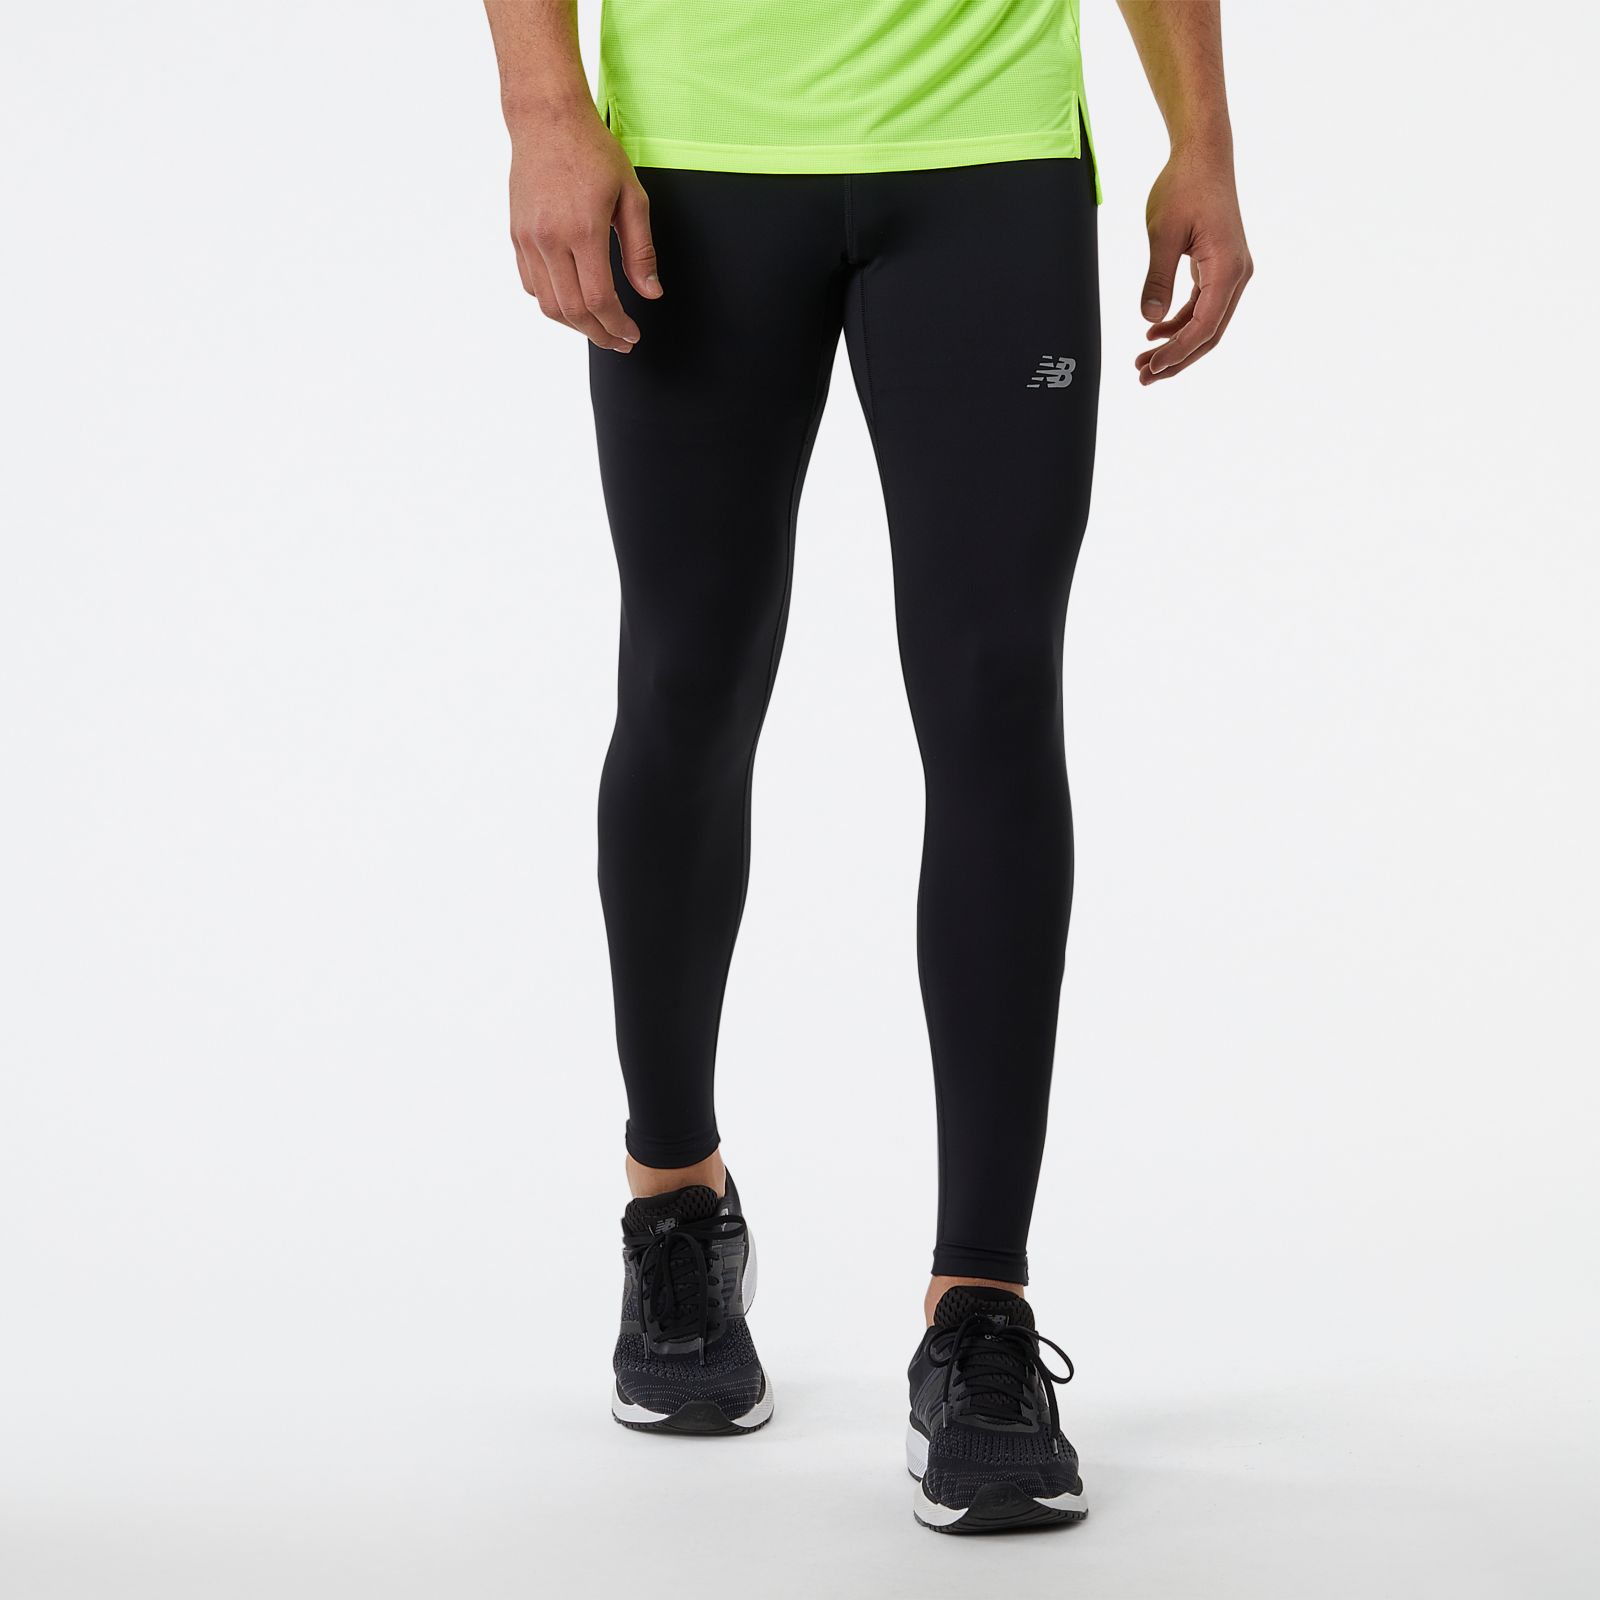 Accelerate Tight: Supportive Men's Running Tights with NB DRY